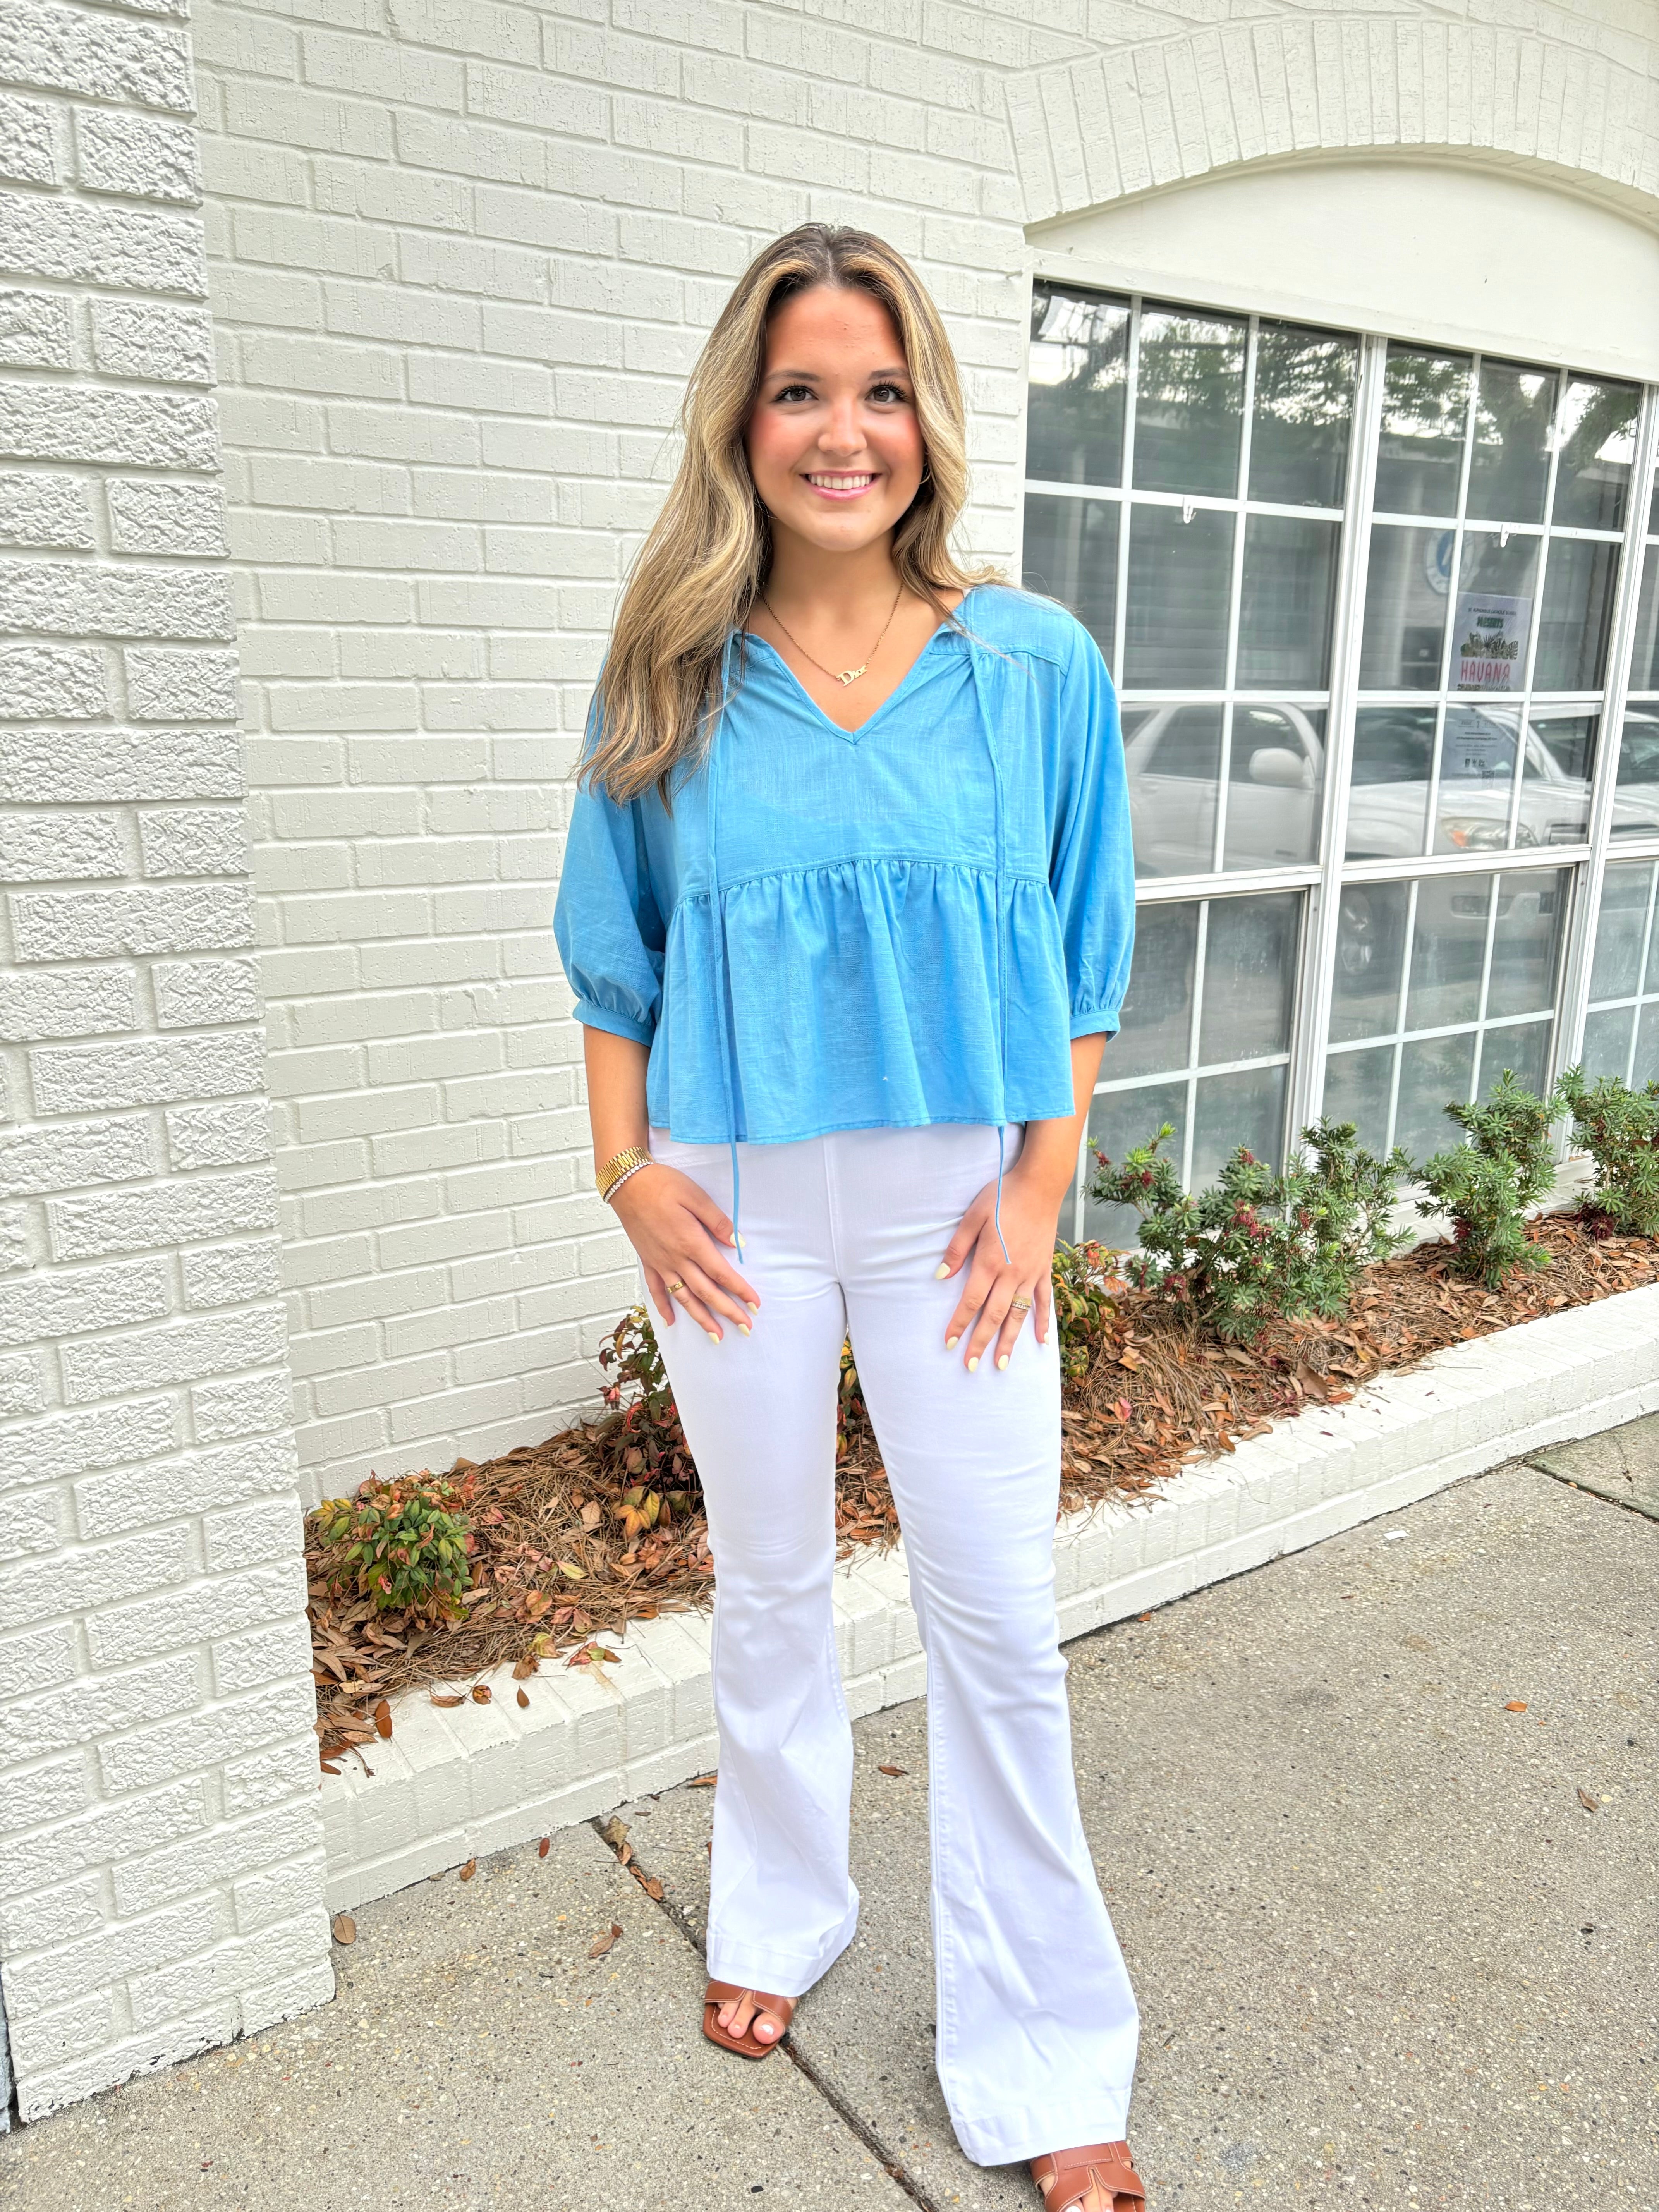 White Pull On Flare Jeans